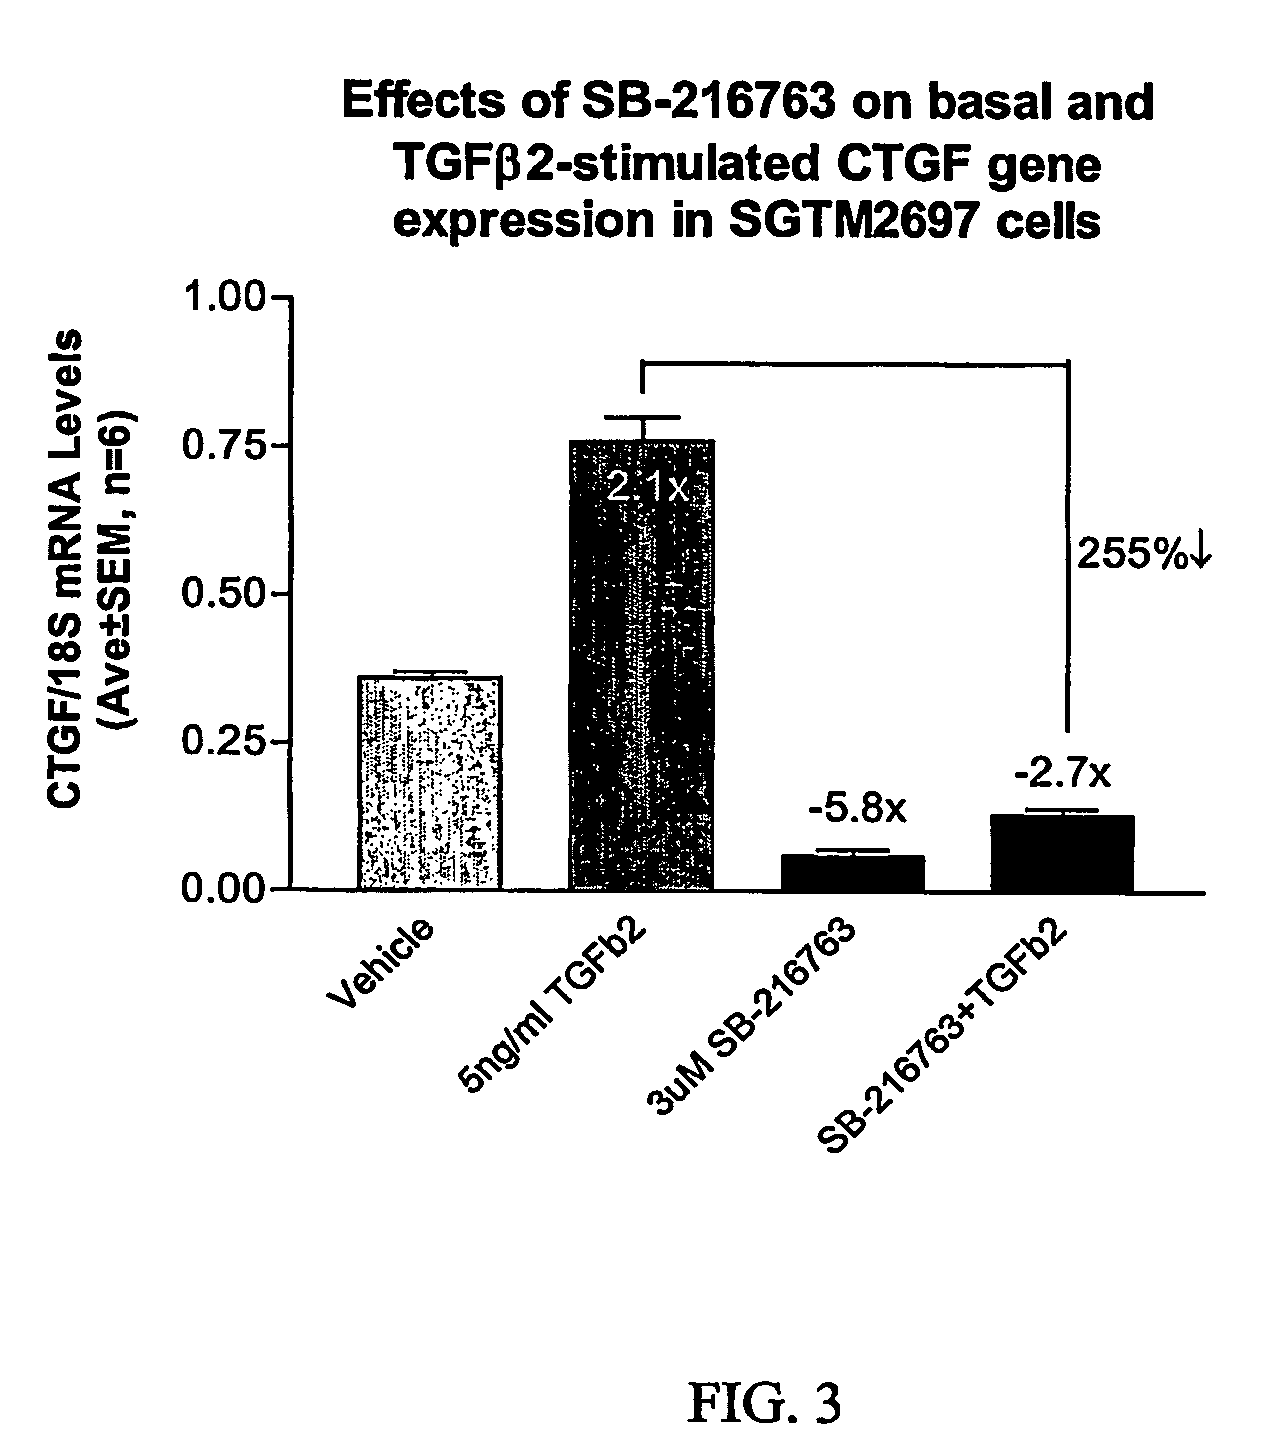 Agents which regulate, inhibit, or modulate the activity and/or expression of connective tissue growth factor (CTGF) as a unique means to both lower intraocular pressure and treat glaucomatous retinopathies/optic neuropathies